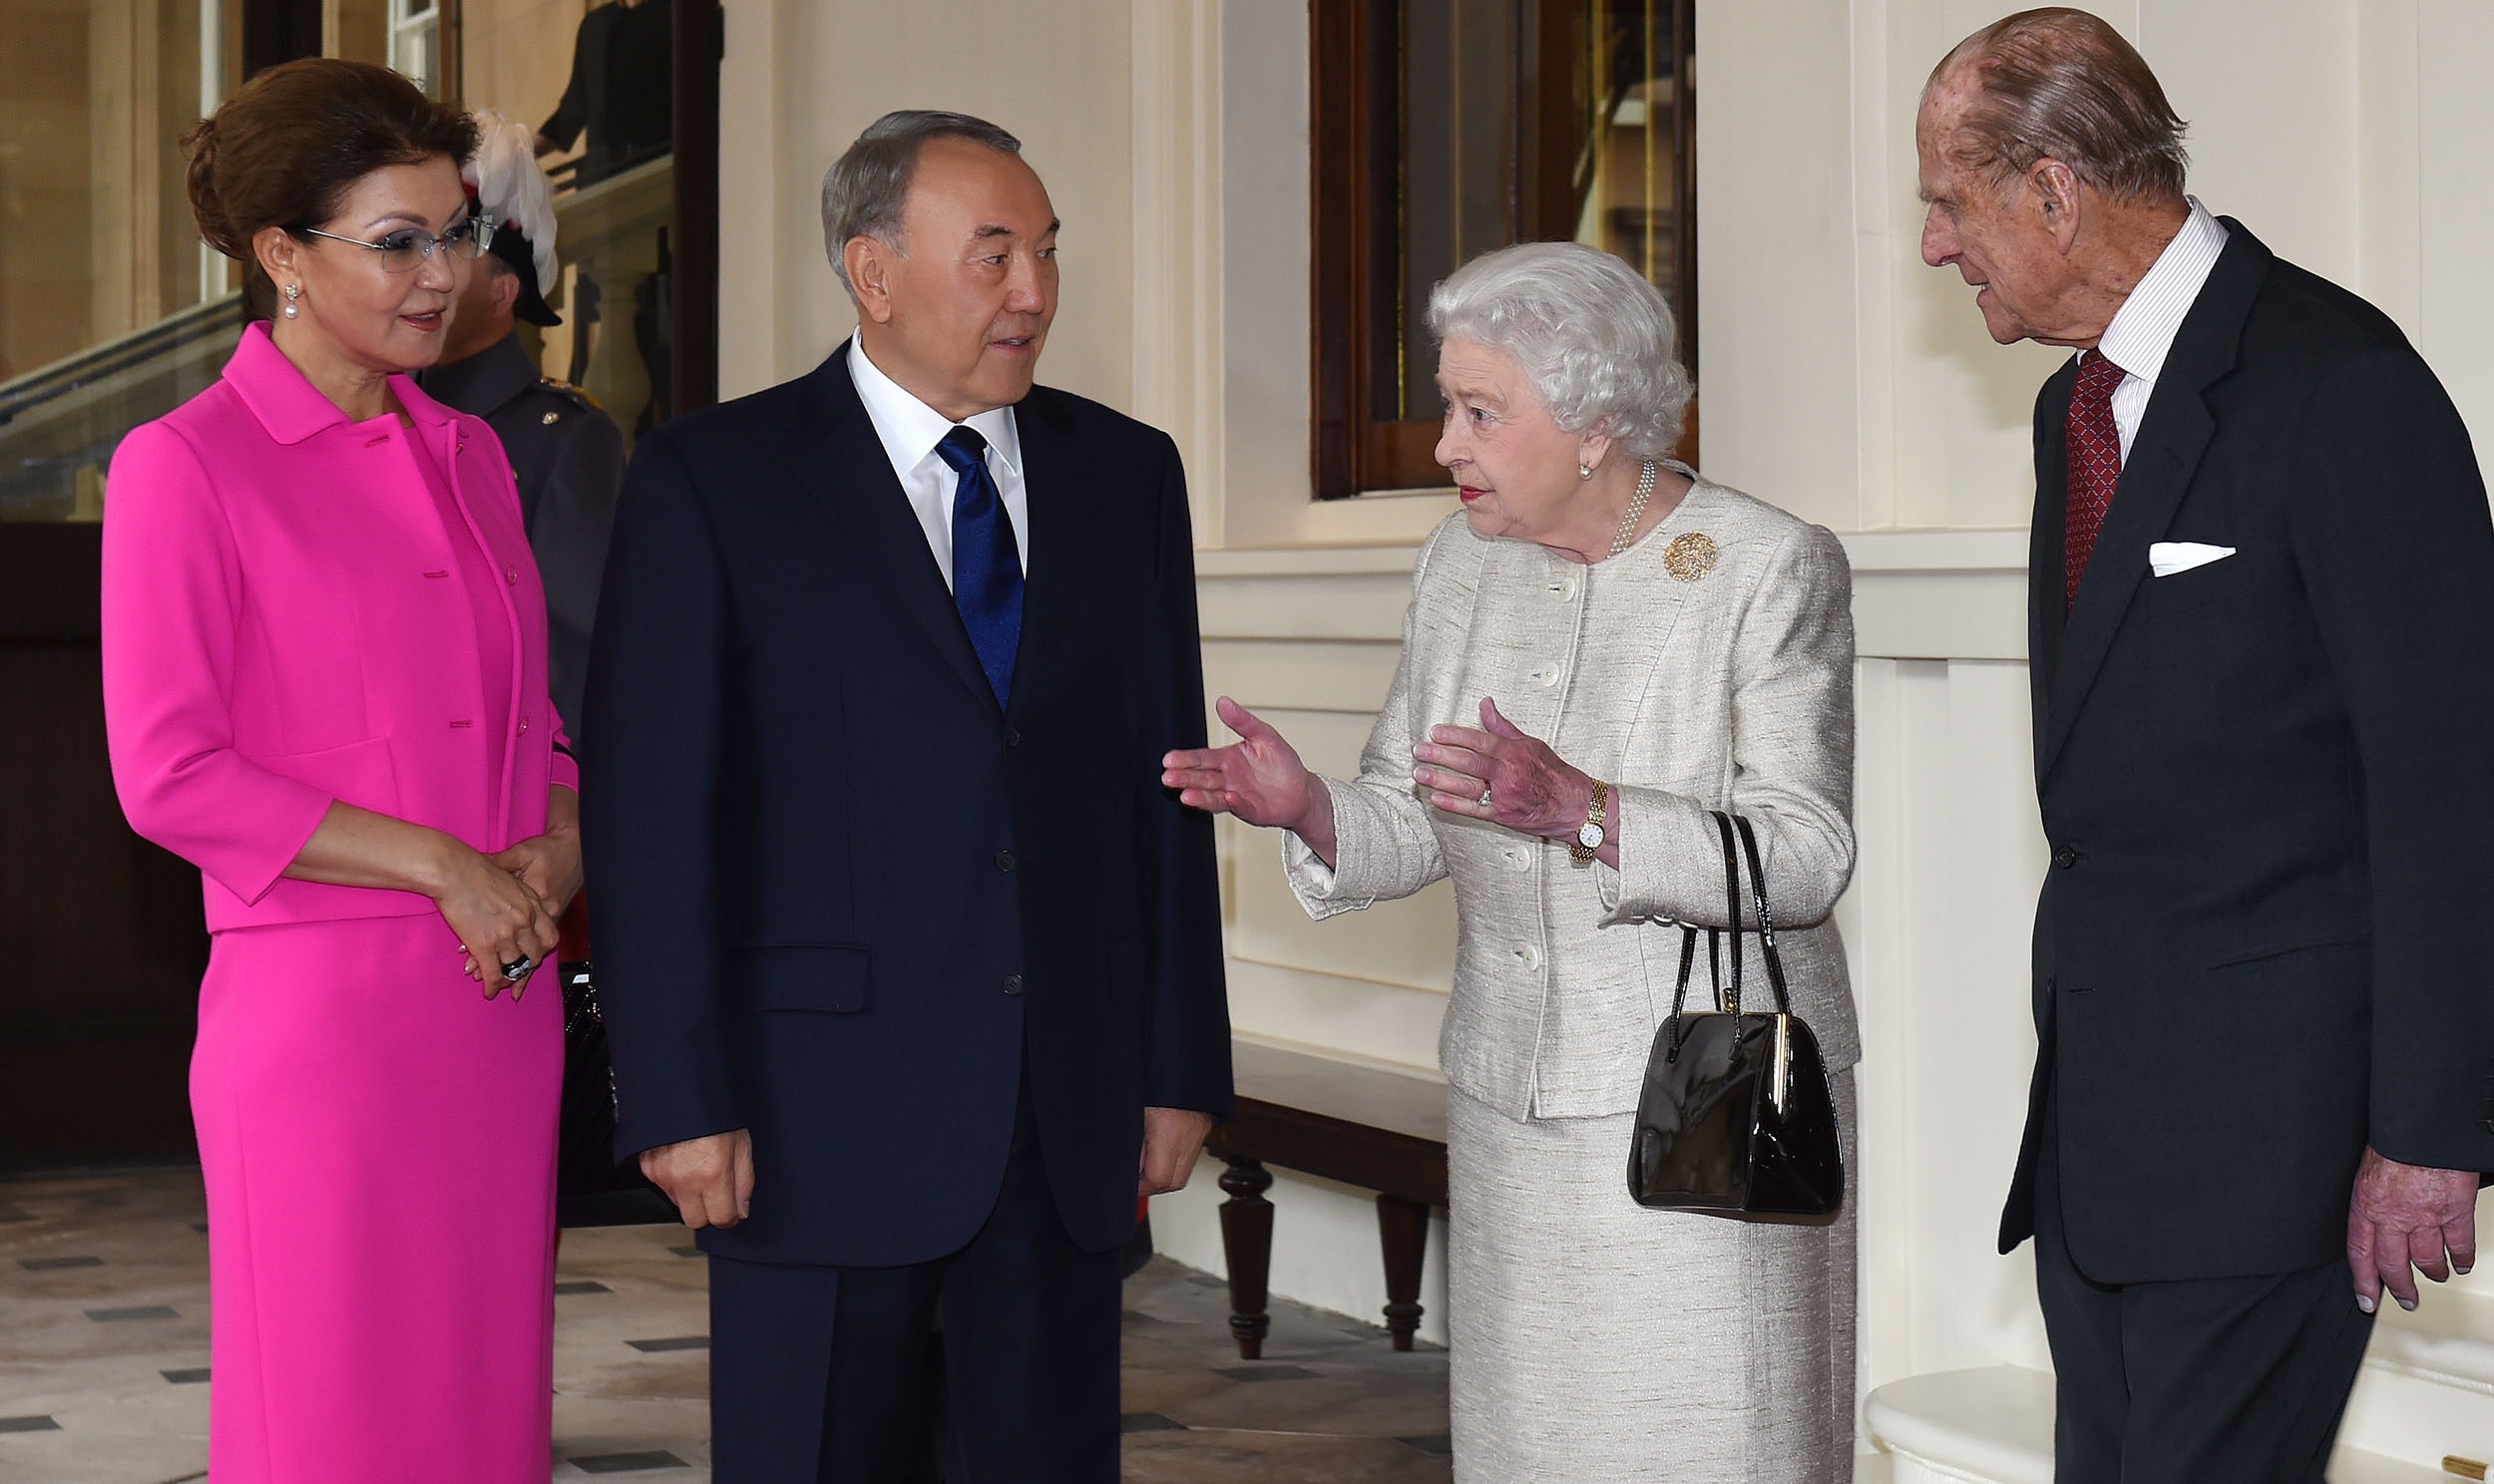 Royal family Dariga Nazarbayeva left with her father former President Nursultan Nazarbayev meeting the queen during a trip to London in 2015jpg